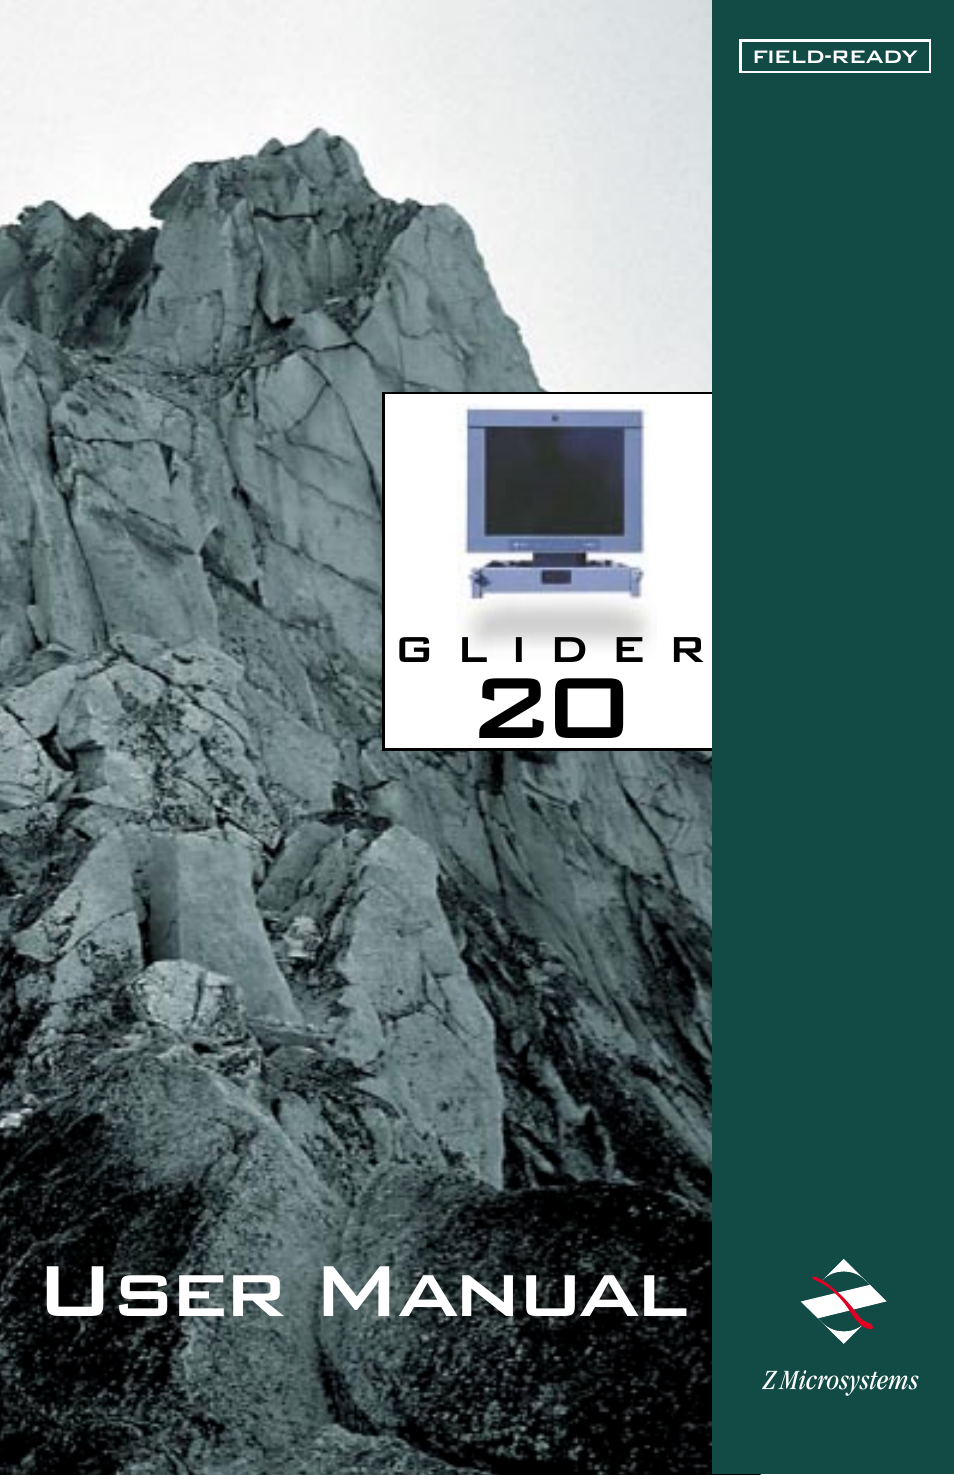 Z Microsystems GLIDER 20 User Manual | 35 pages